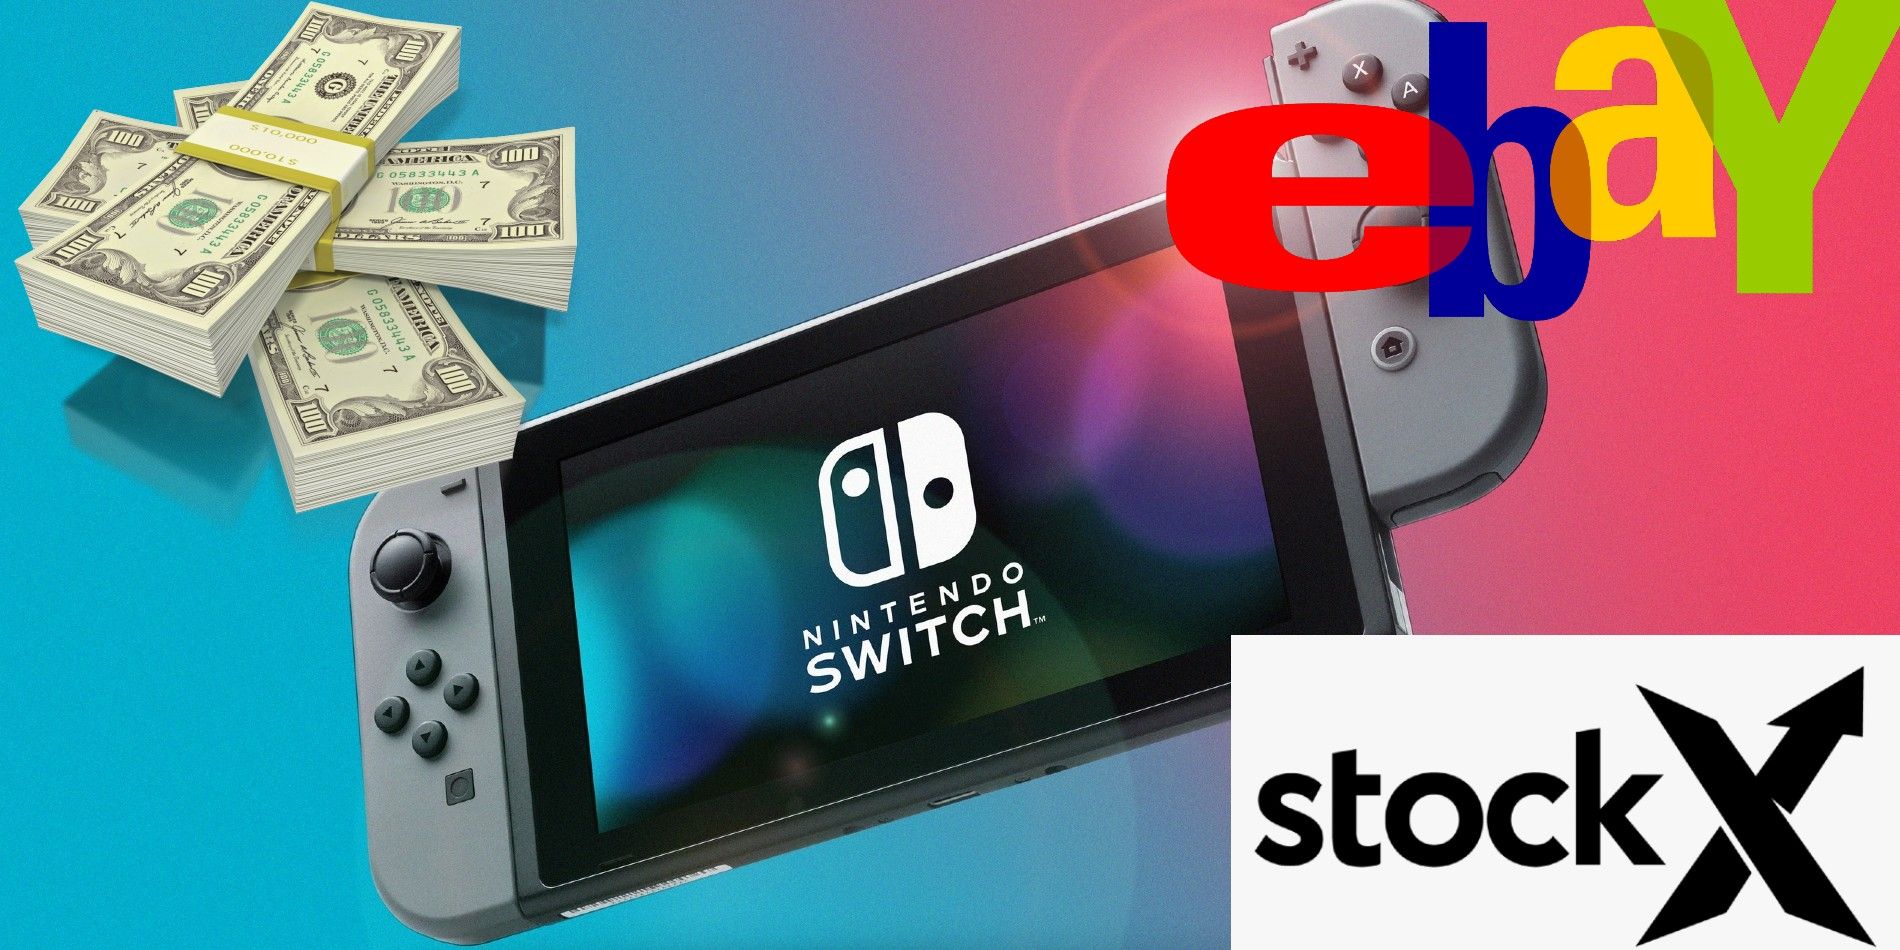 Will Nintendo Switch Pro's Release Mirror Sony's PS5 Console Fiasco - Switch Image With Ebay StockX And Cash Stack Overlays